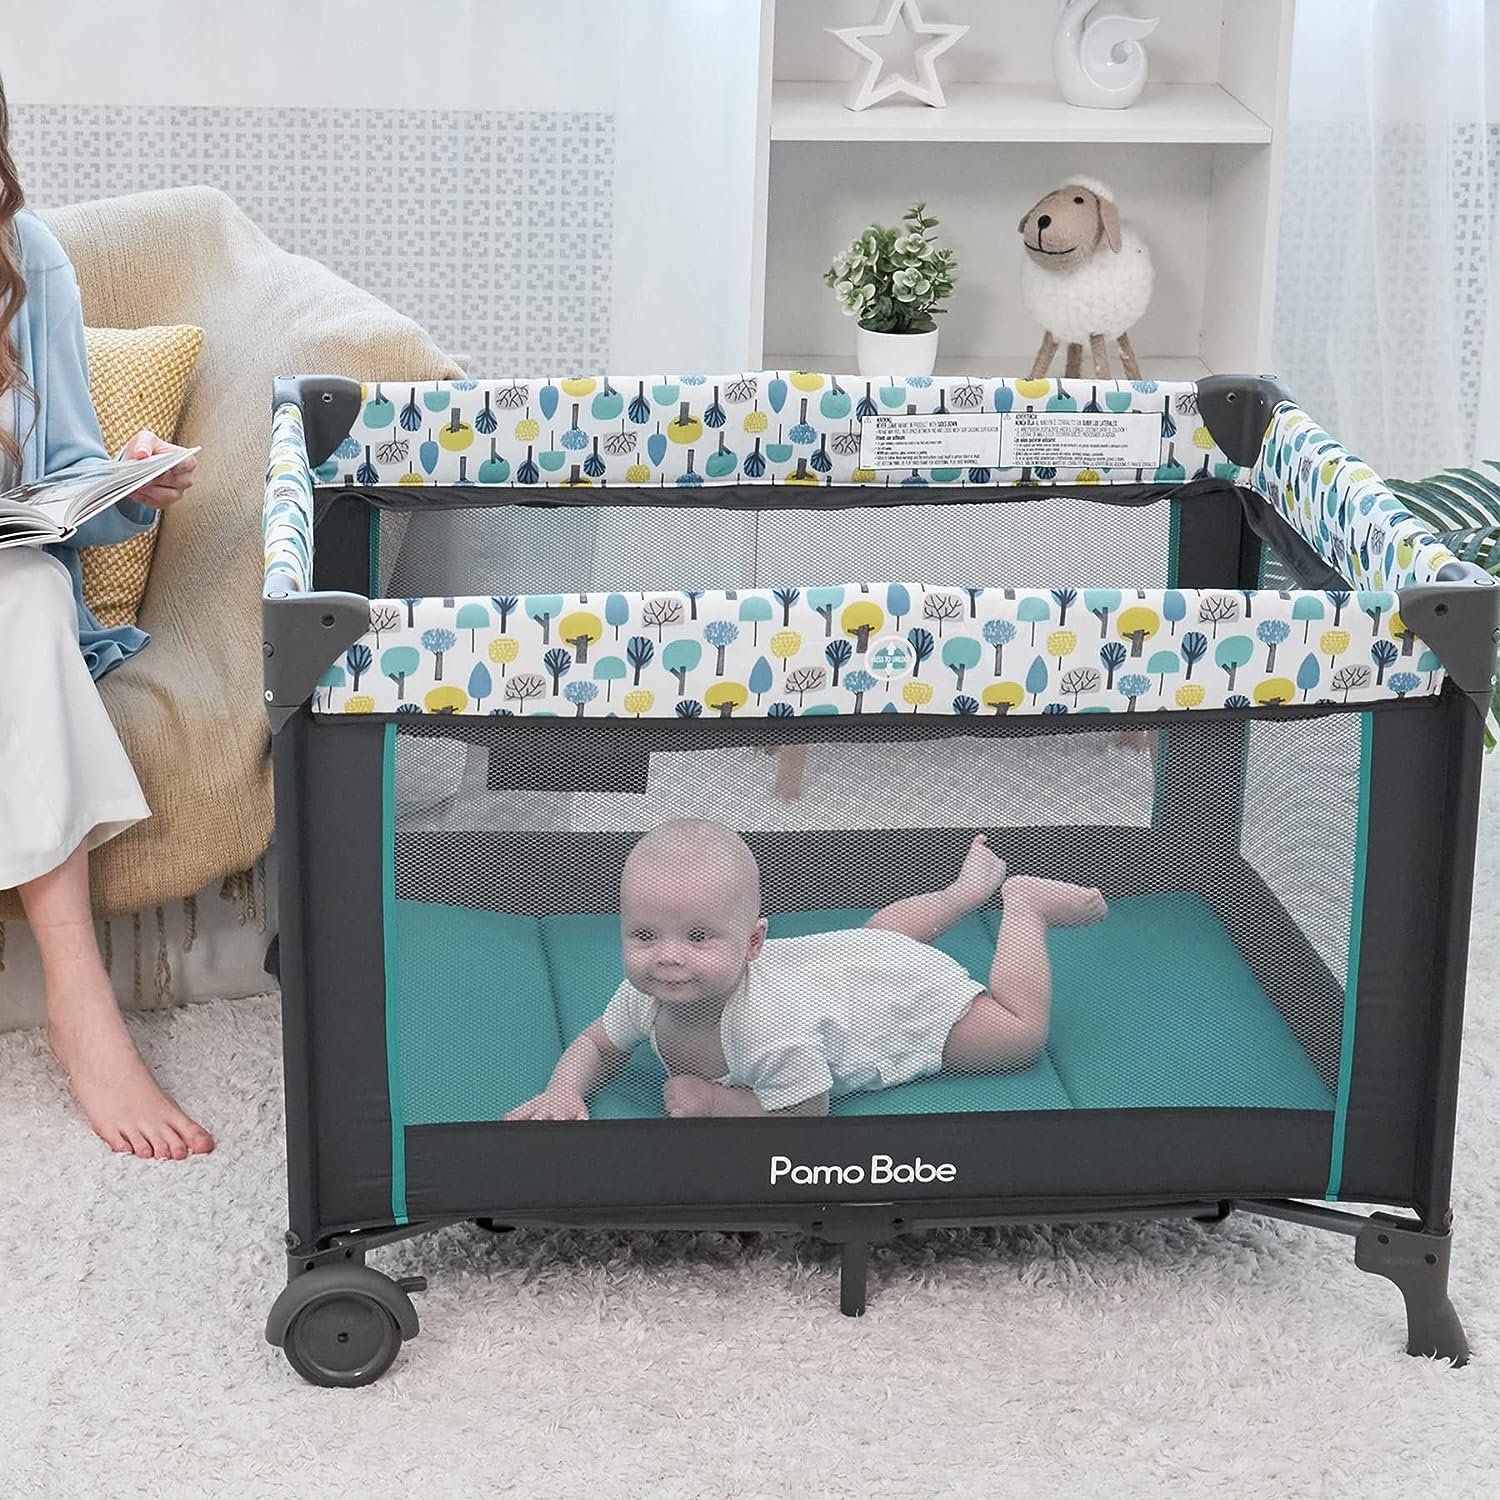 Comparing 6 Portable Cribs: Pros and Cons